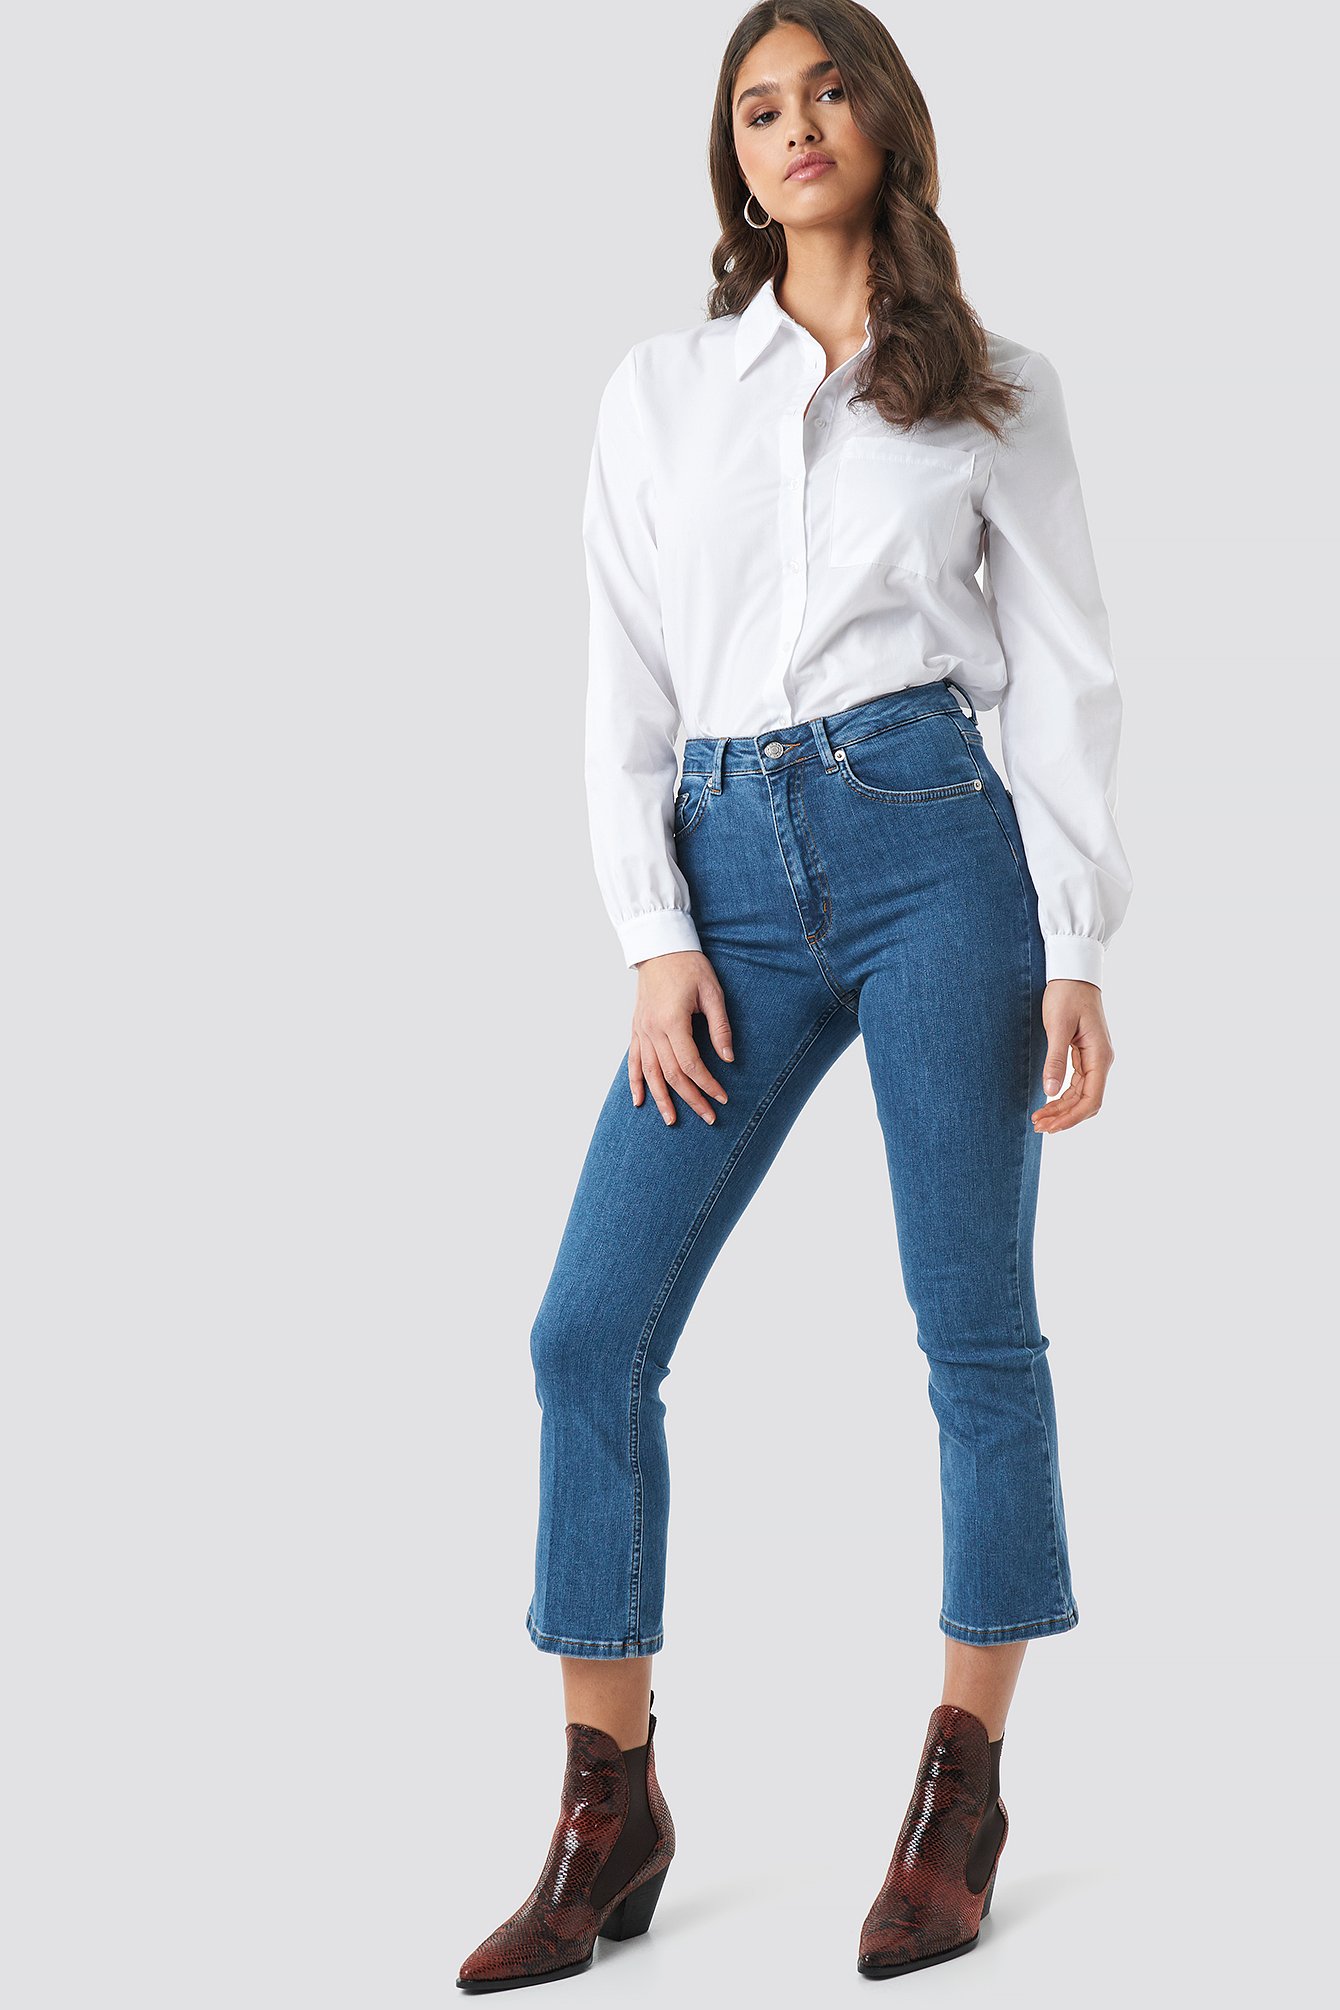 jeans flared cropped